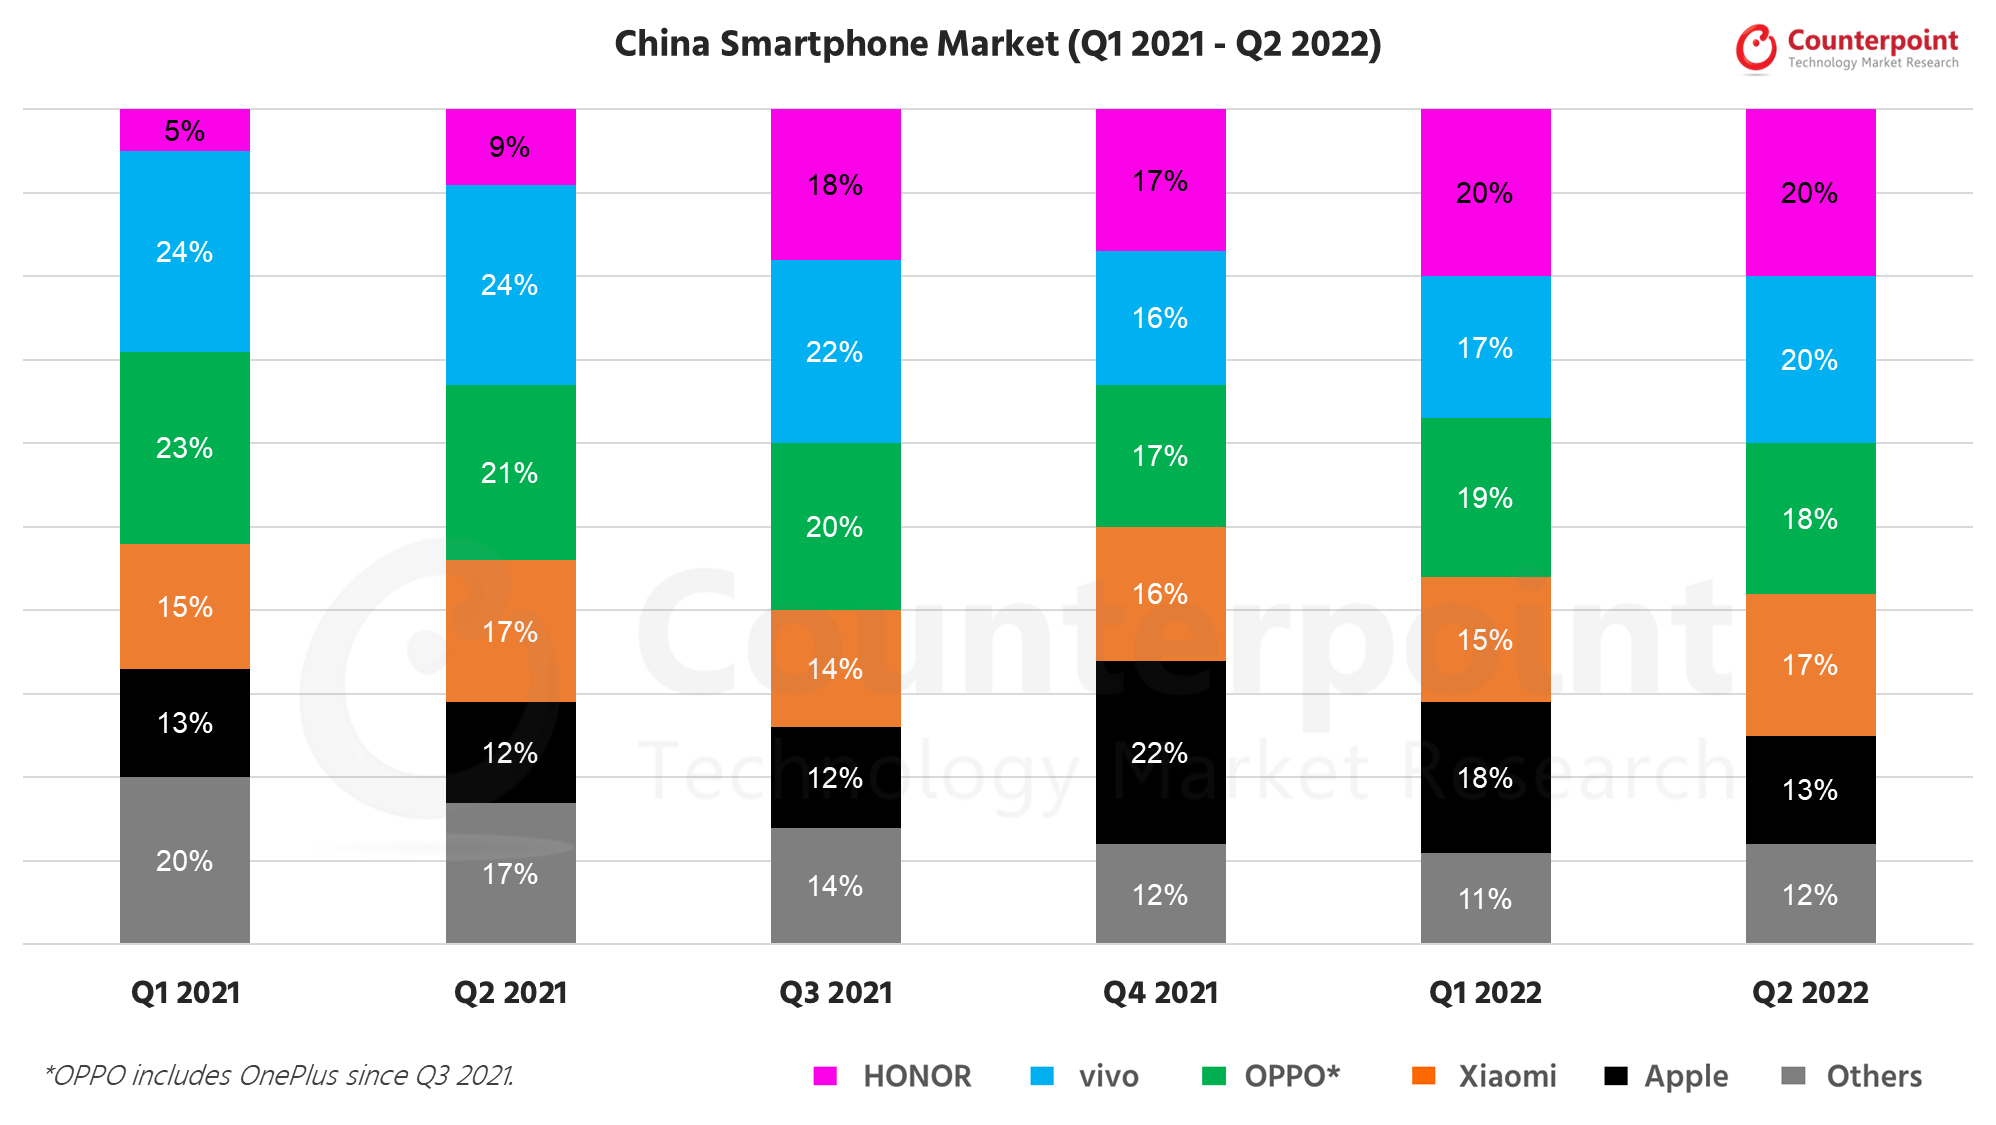 Counterpoint Research China Smartphone Market Q2 2022